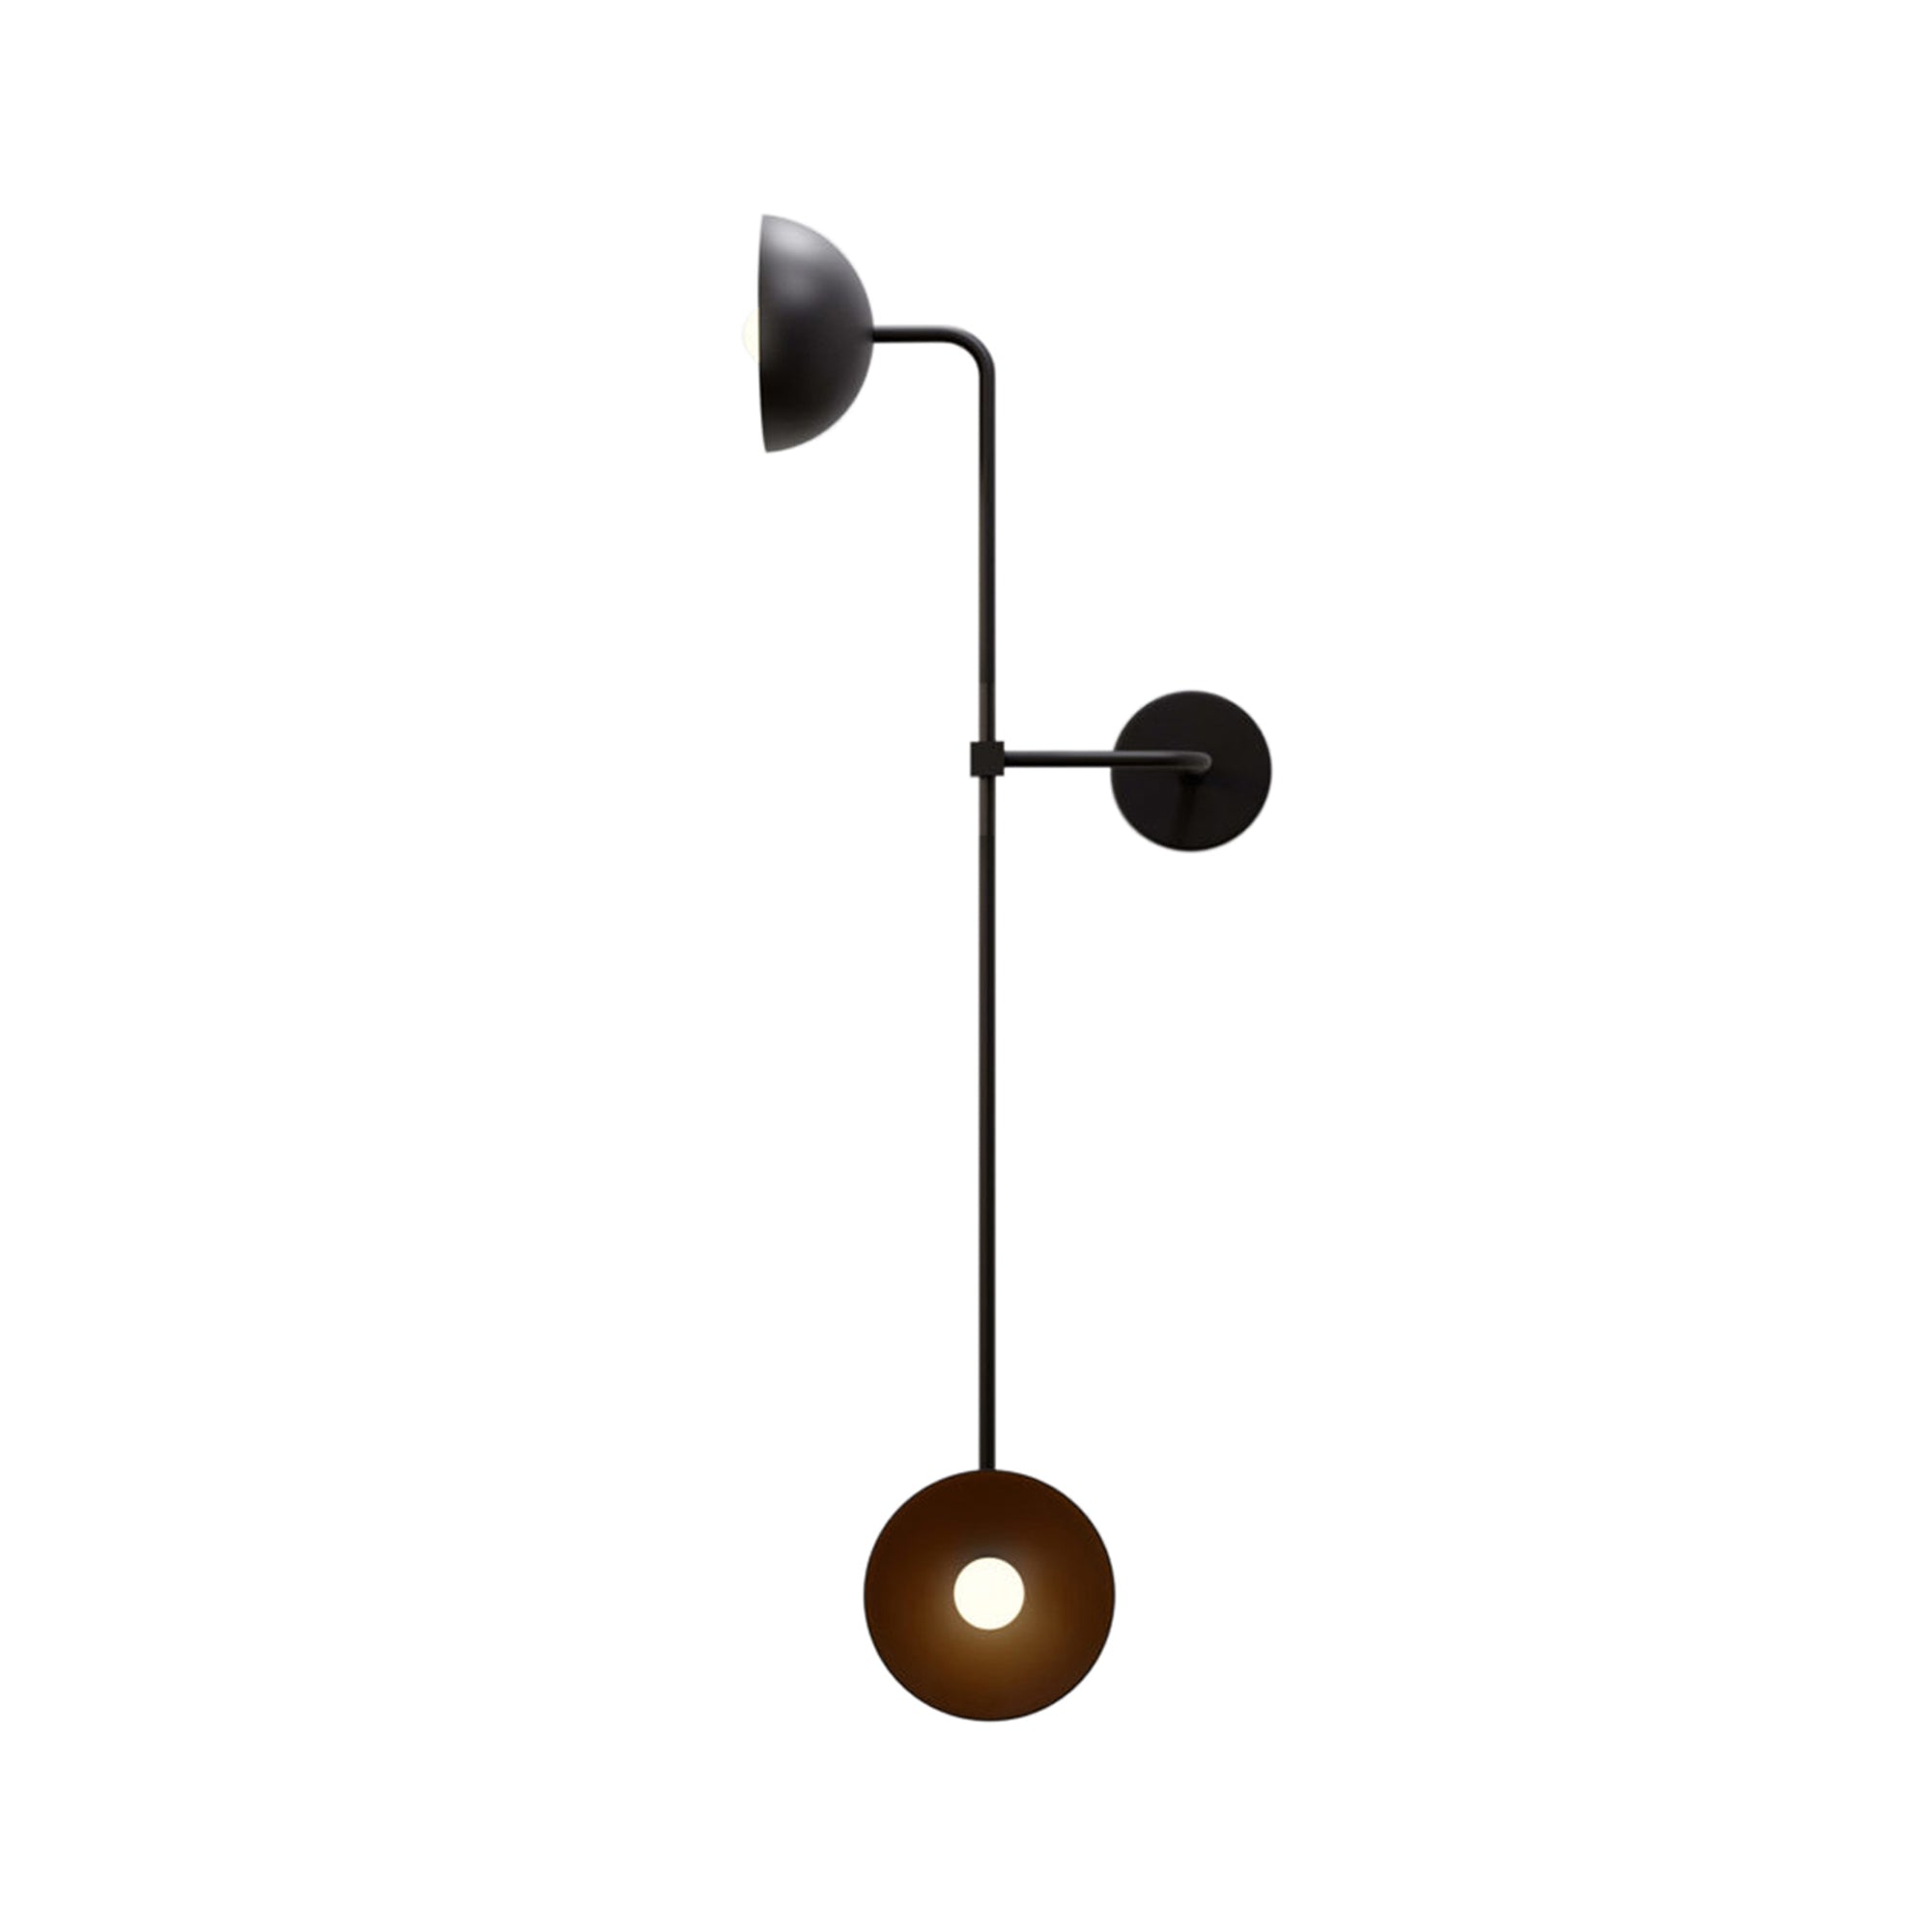 Beaubien Wall Double Shade Lamp: Graphite + Reversed